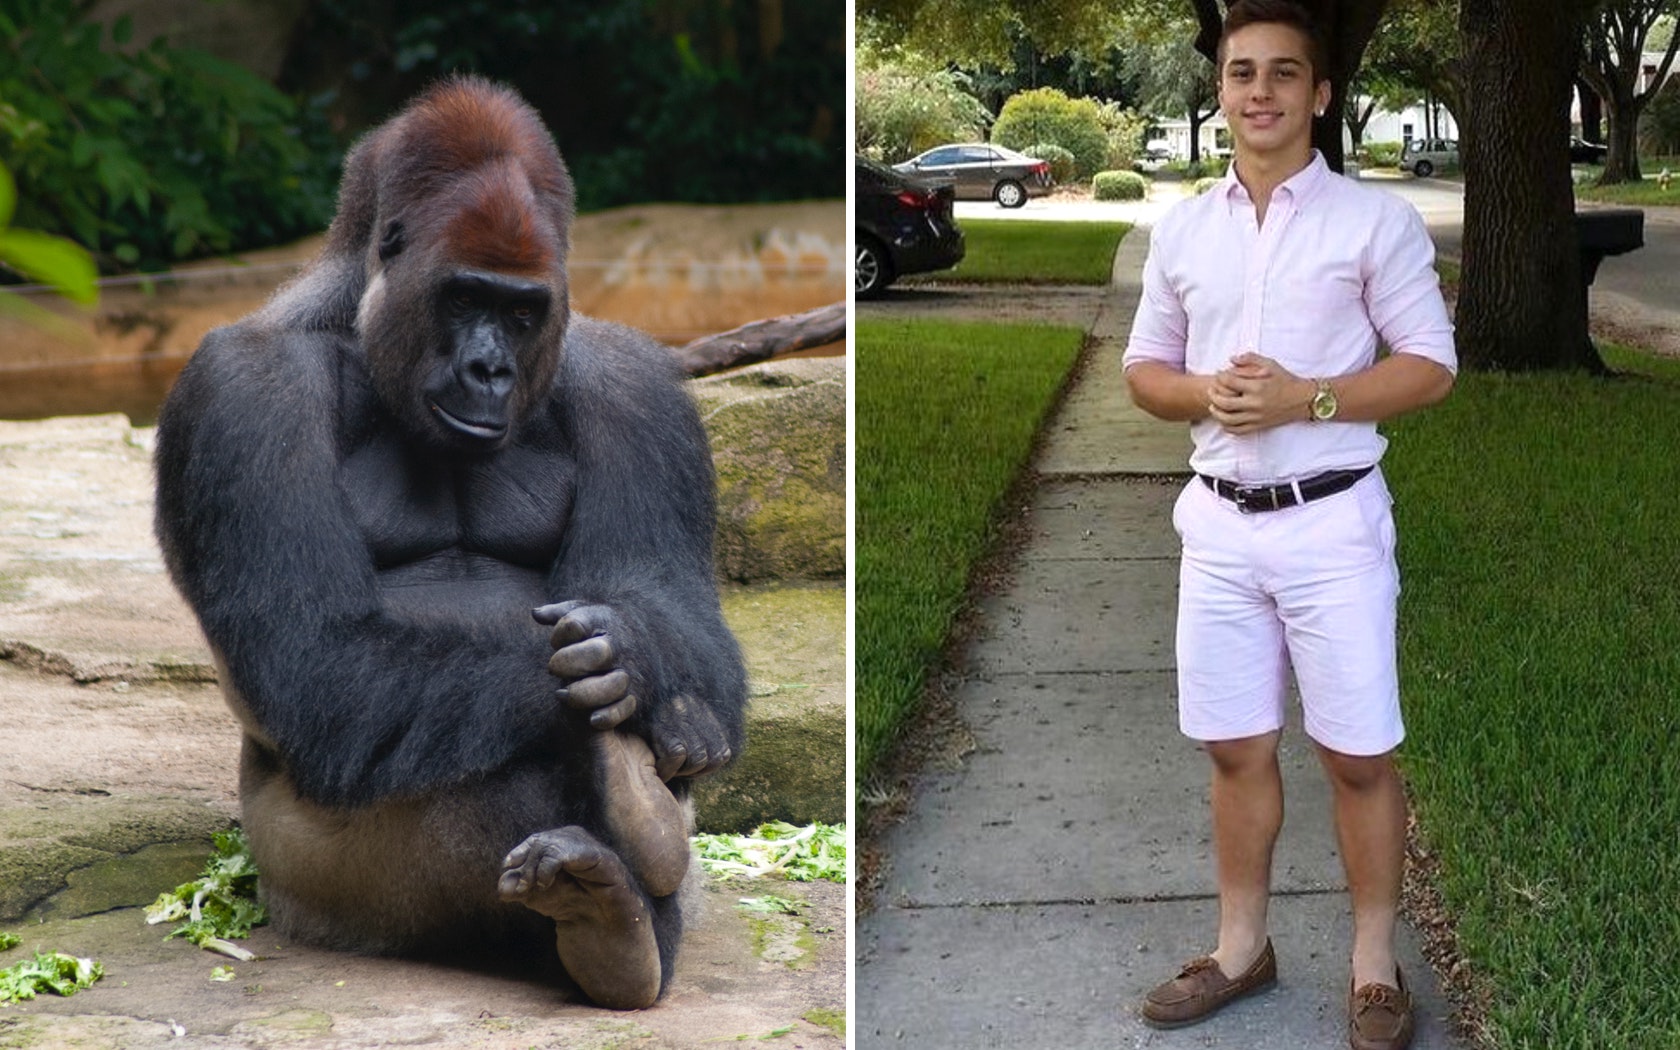 meme travel harambe you know i had to do it to em